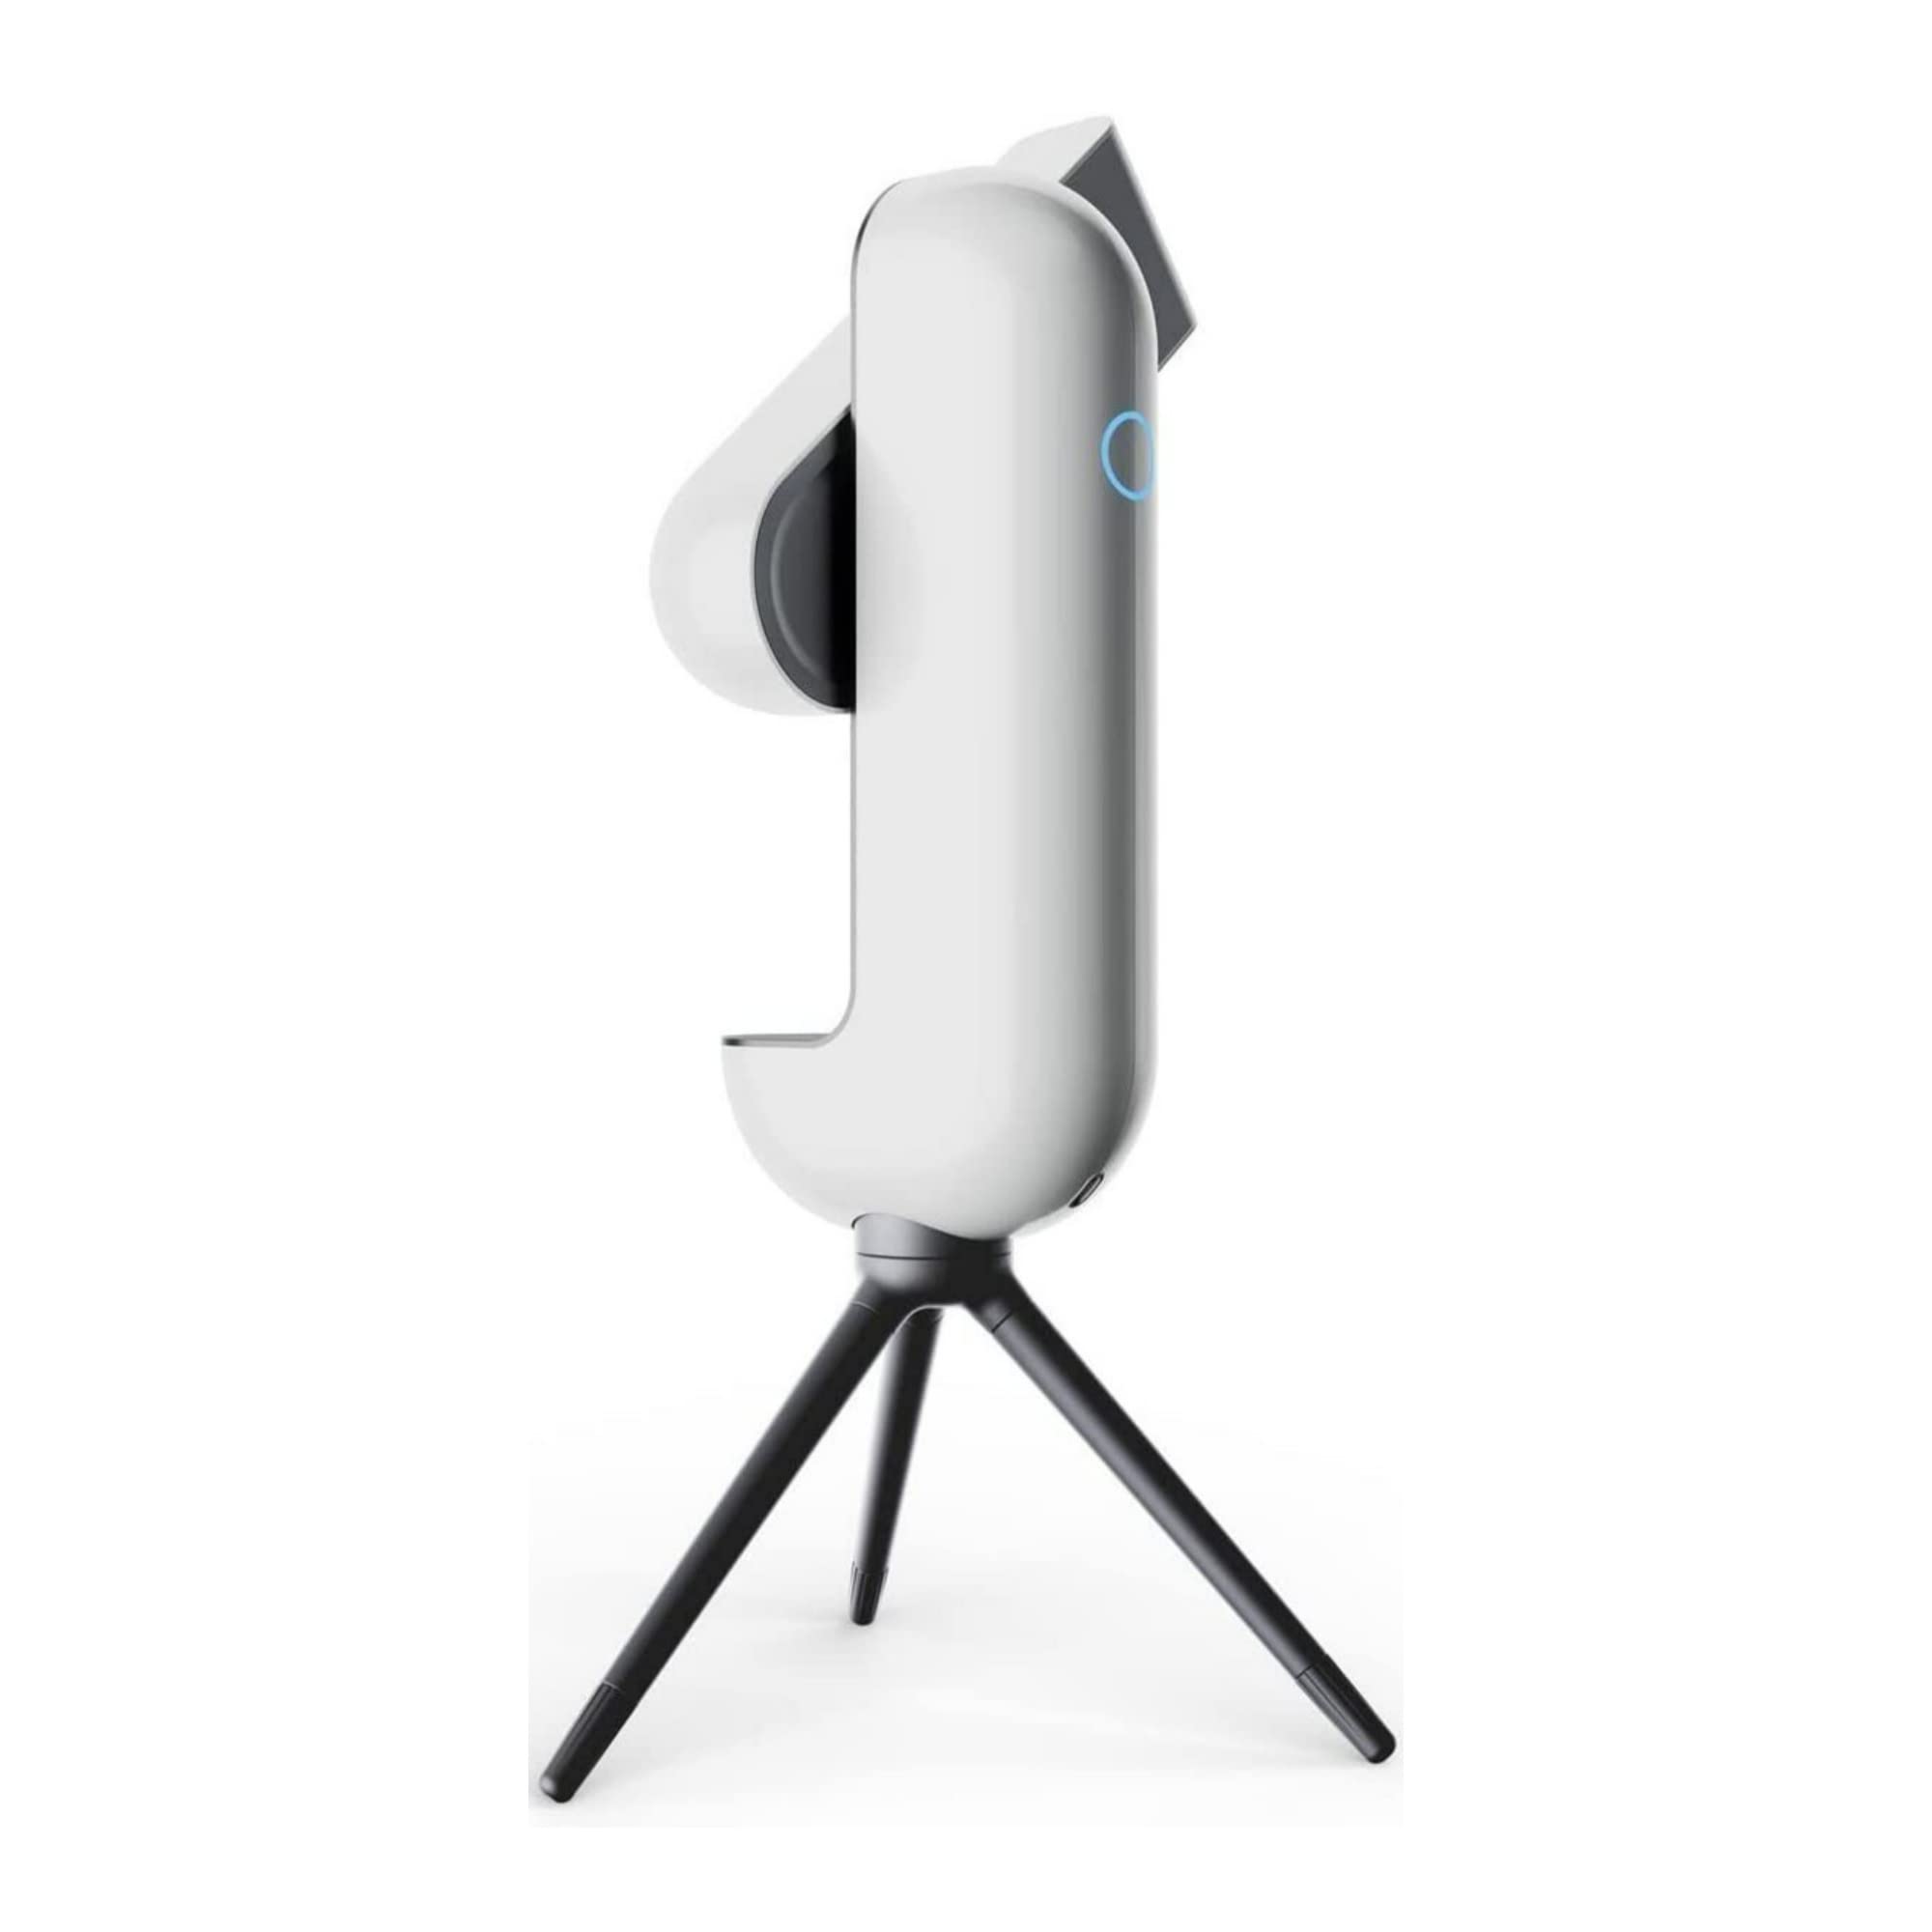 Vaonis Vespera Easy to Use, Redesigned, Smart, and Fully Automated Observation Station with Tripod, USB Wall Charger and USB Magnetic Cable